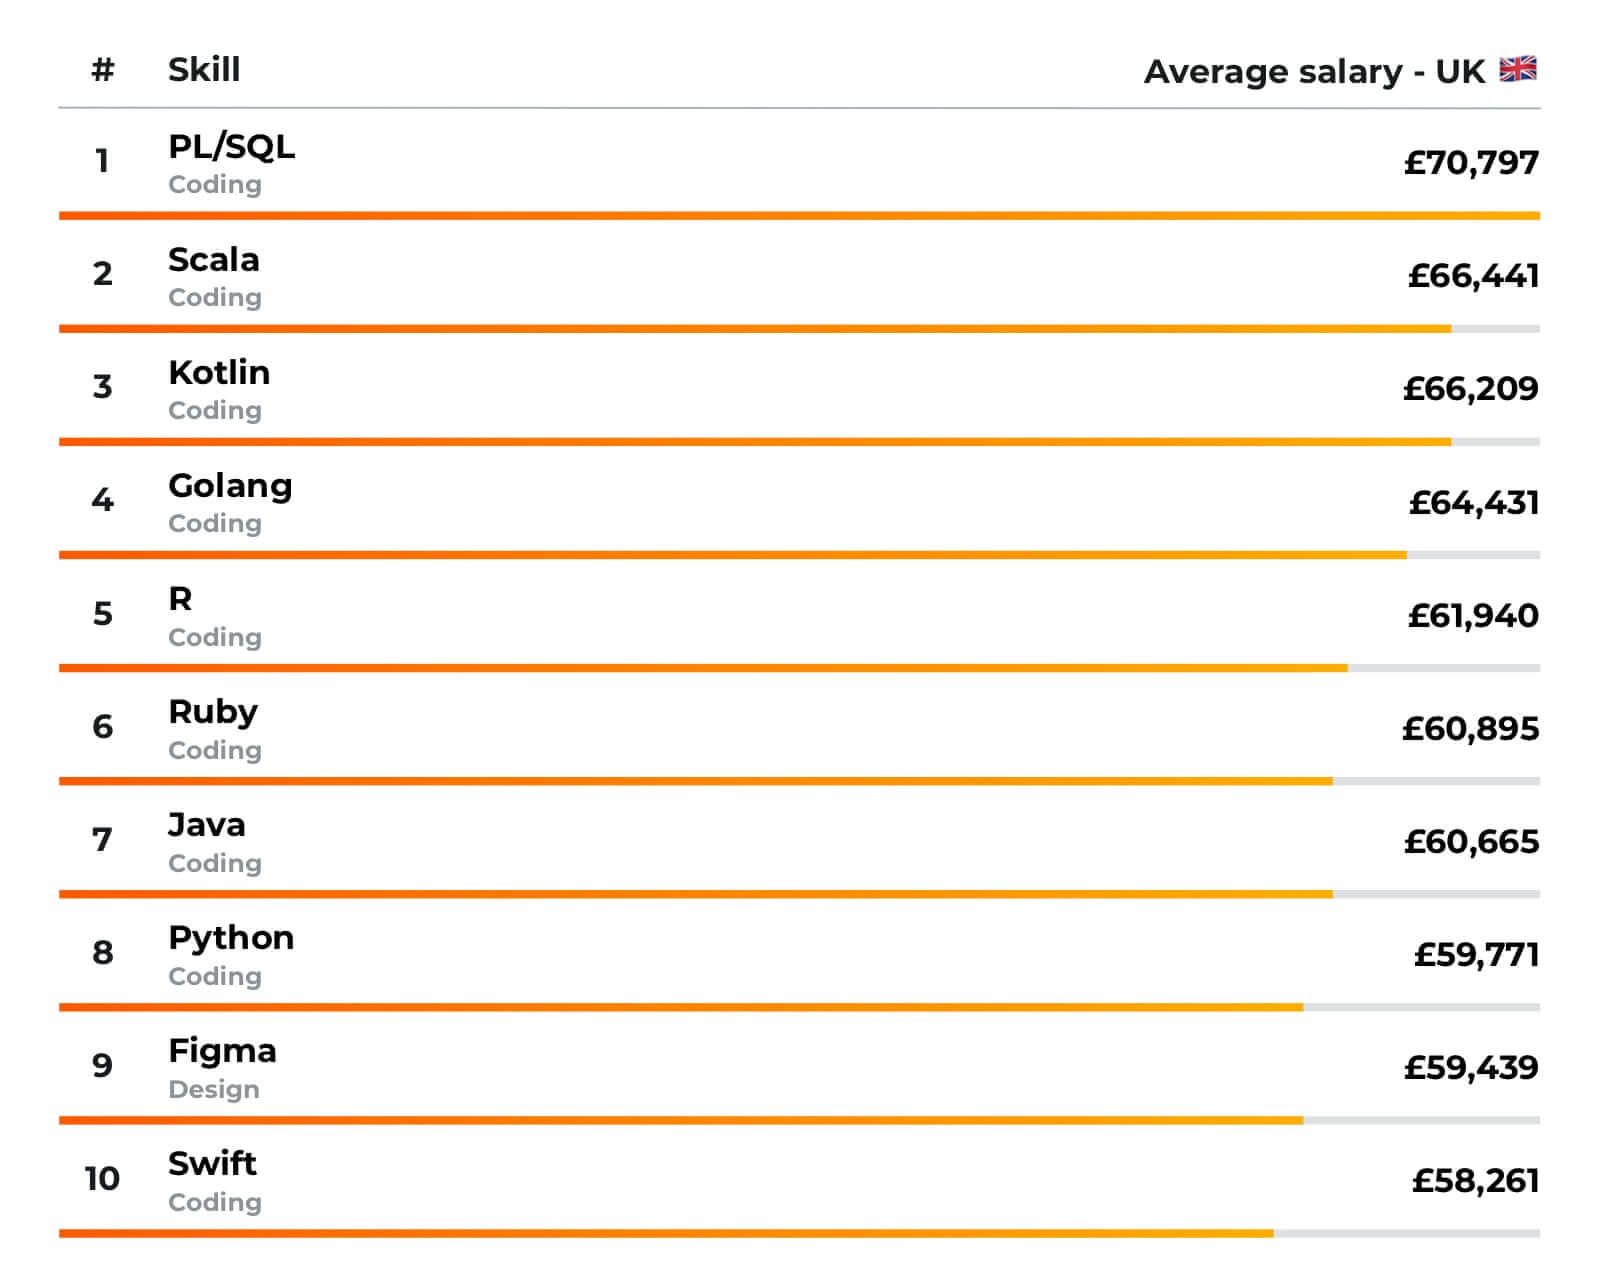 Highest-paying technologies in the UK